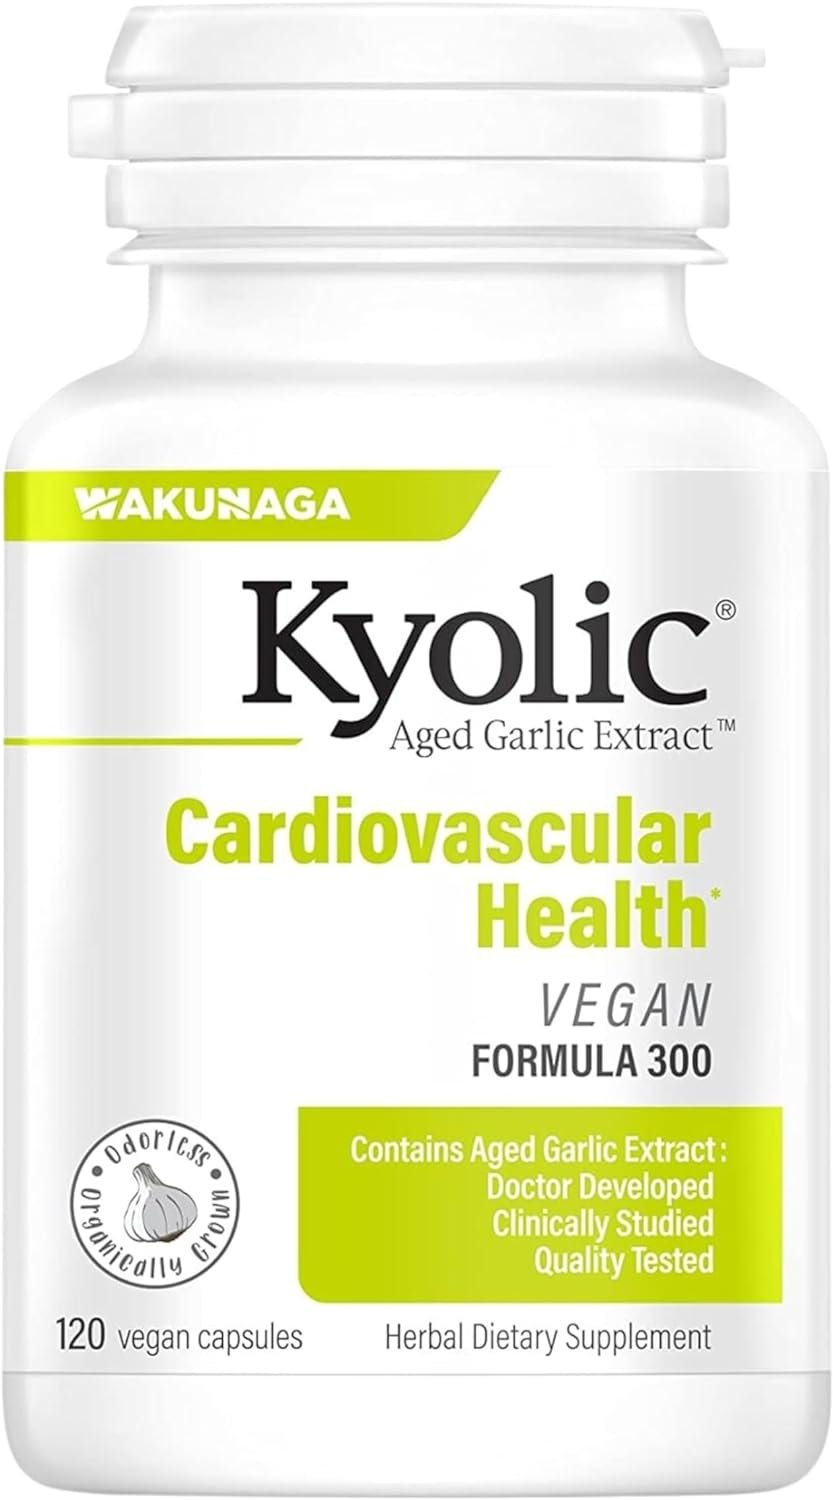 Kyolic Aged Garlic Extract Cardiovascular Health Vegan Formula 300 Vegan - Cardiovascular Health Support - 120 Capsules with Multi-Purpose Keychain